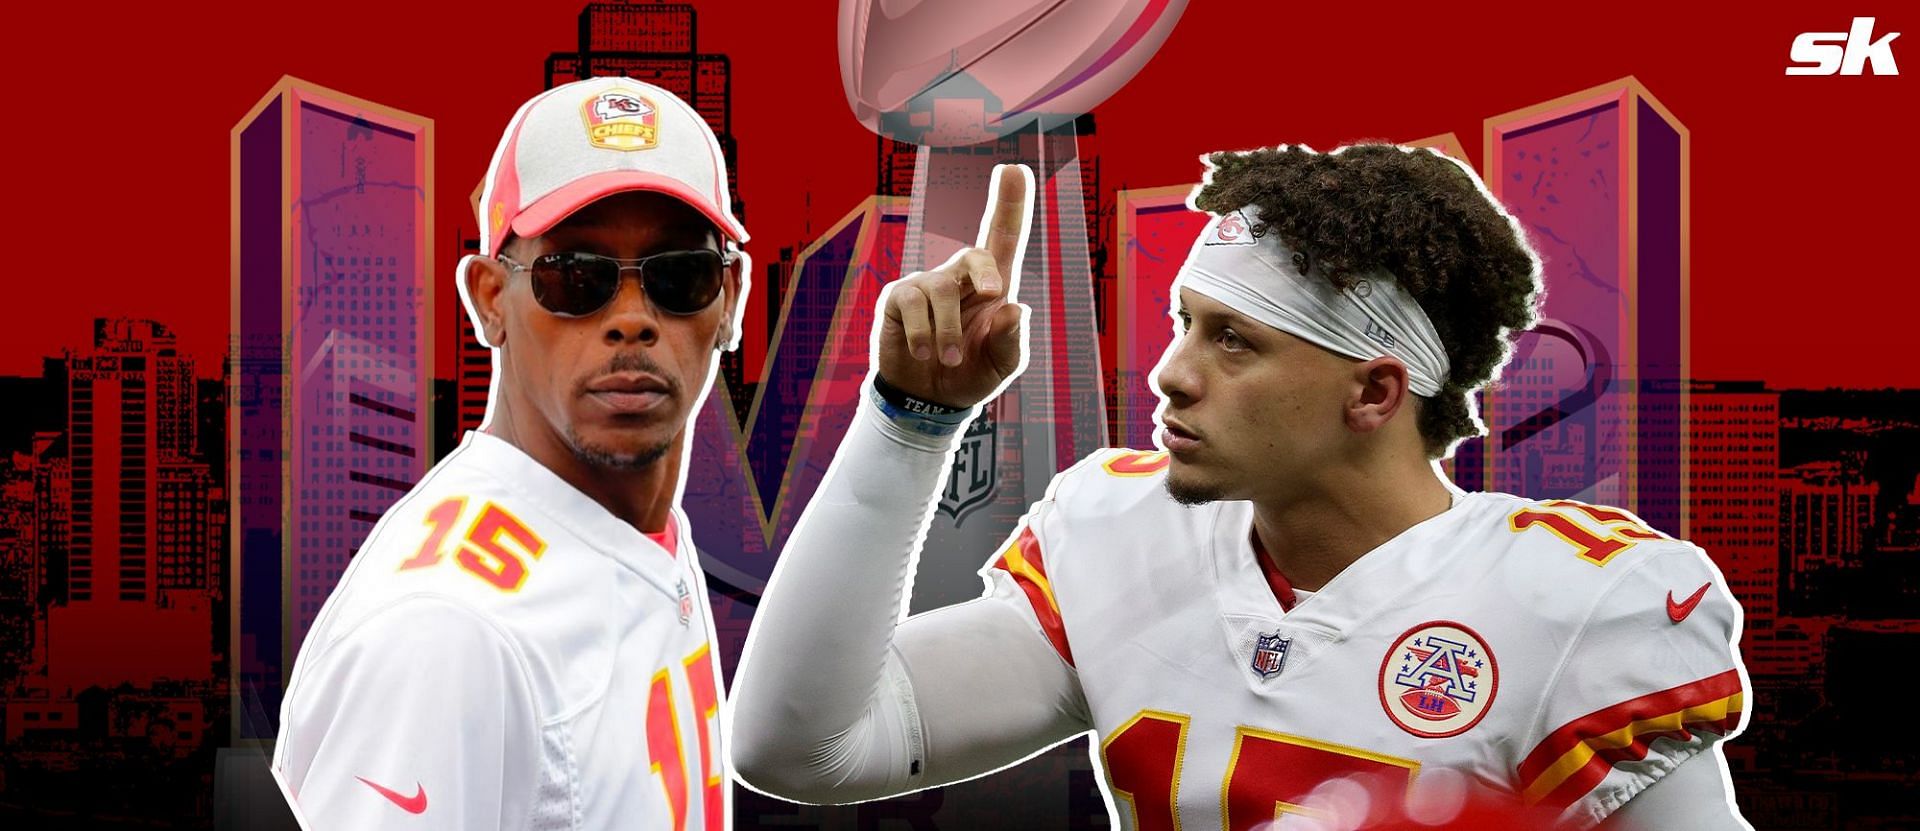 Giants Super Bowl champ rues timing of Patrick Mahomes&rsquo; dad&rsquo;s arrest as distraction ahead of Super Bowl 58 vs 49ers